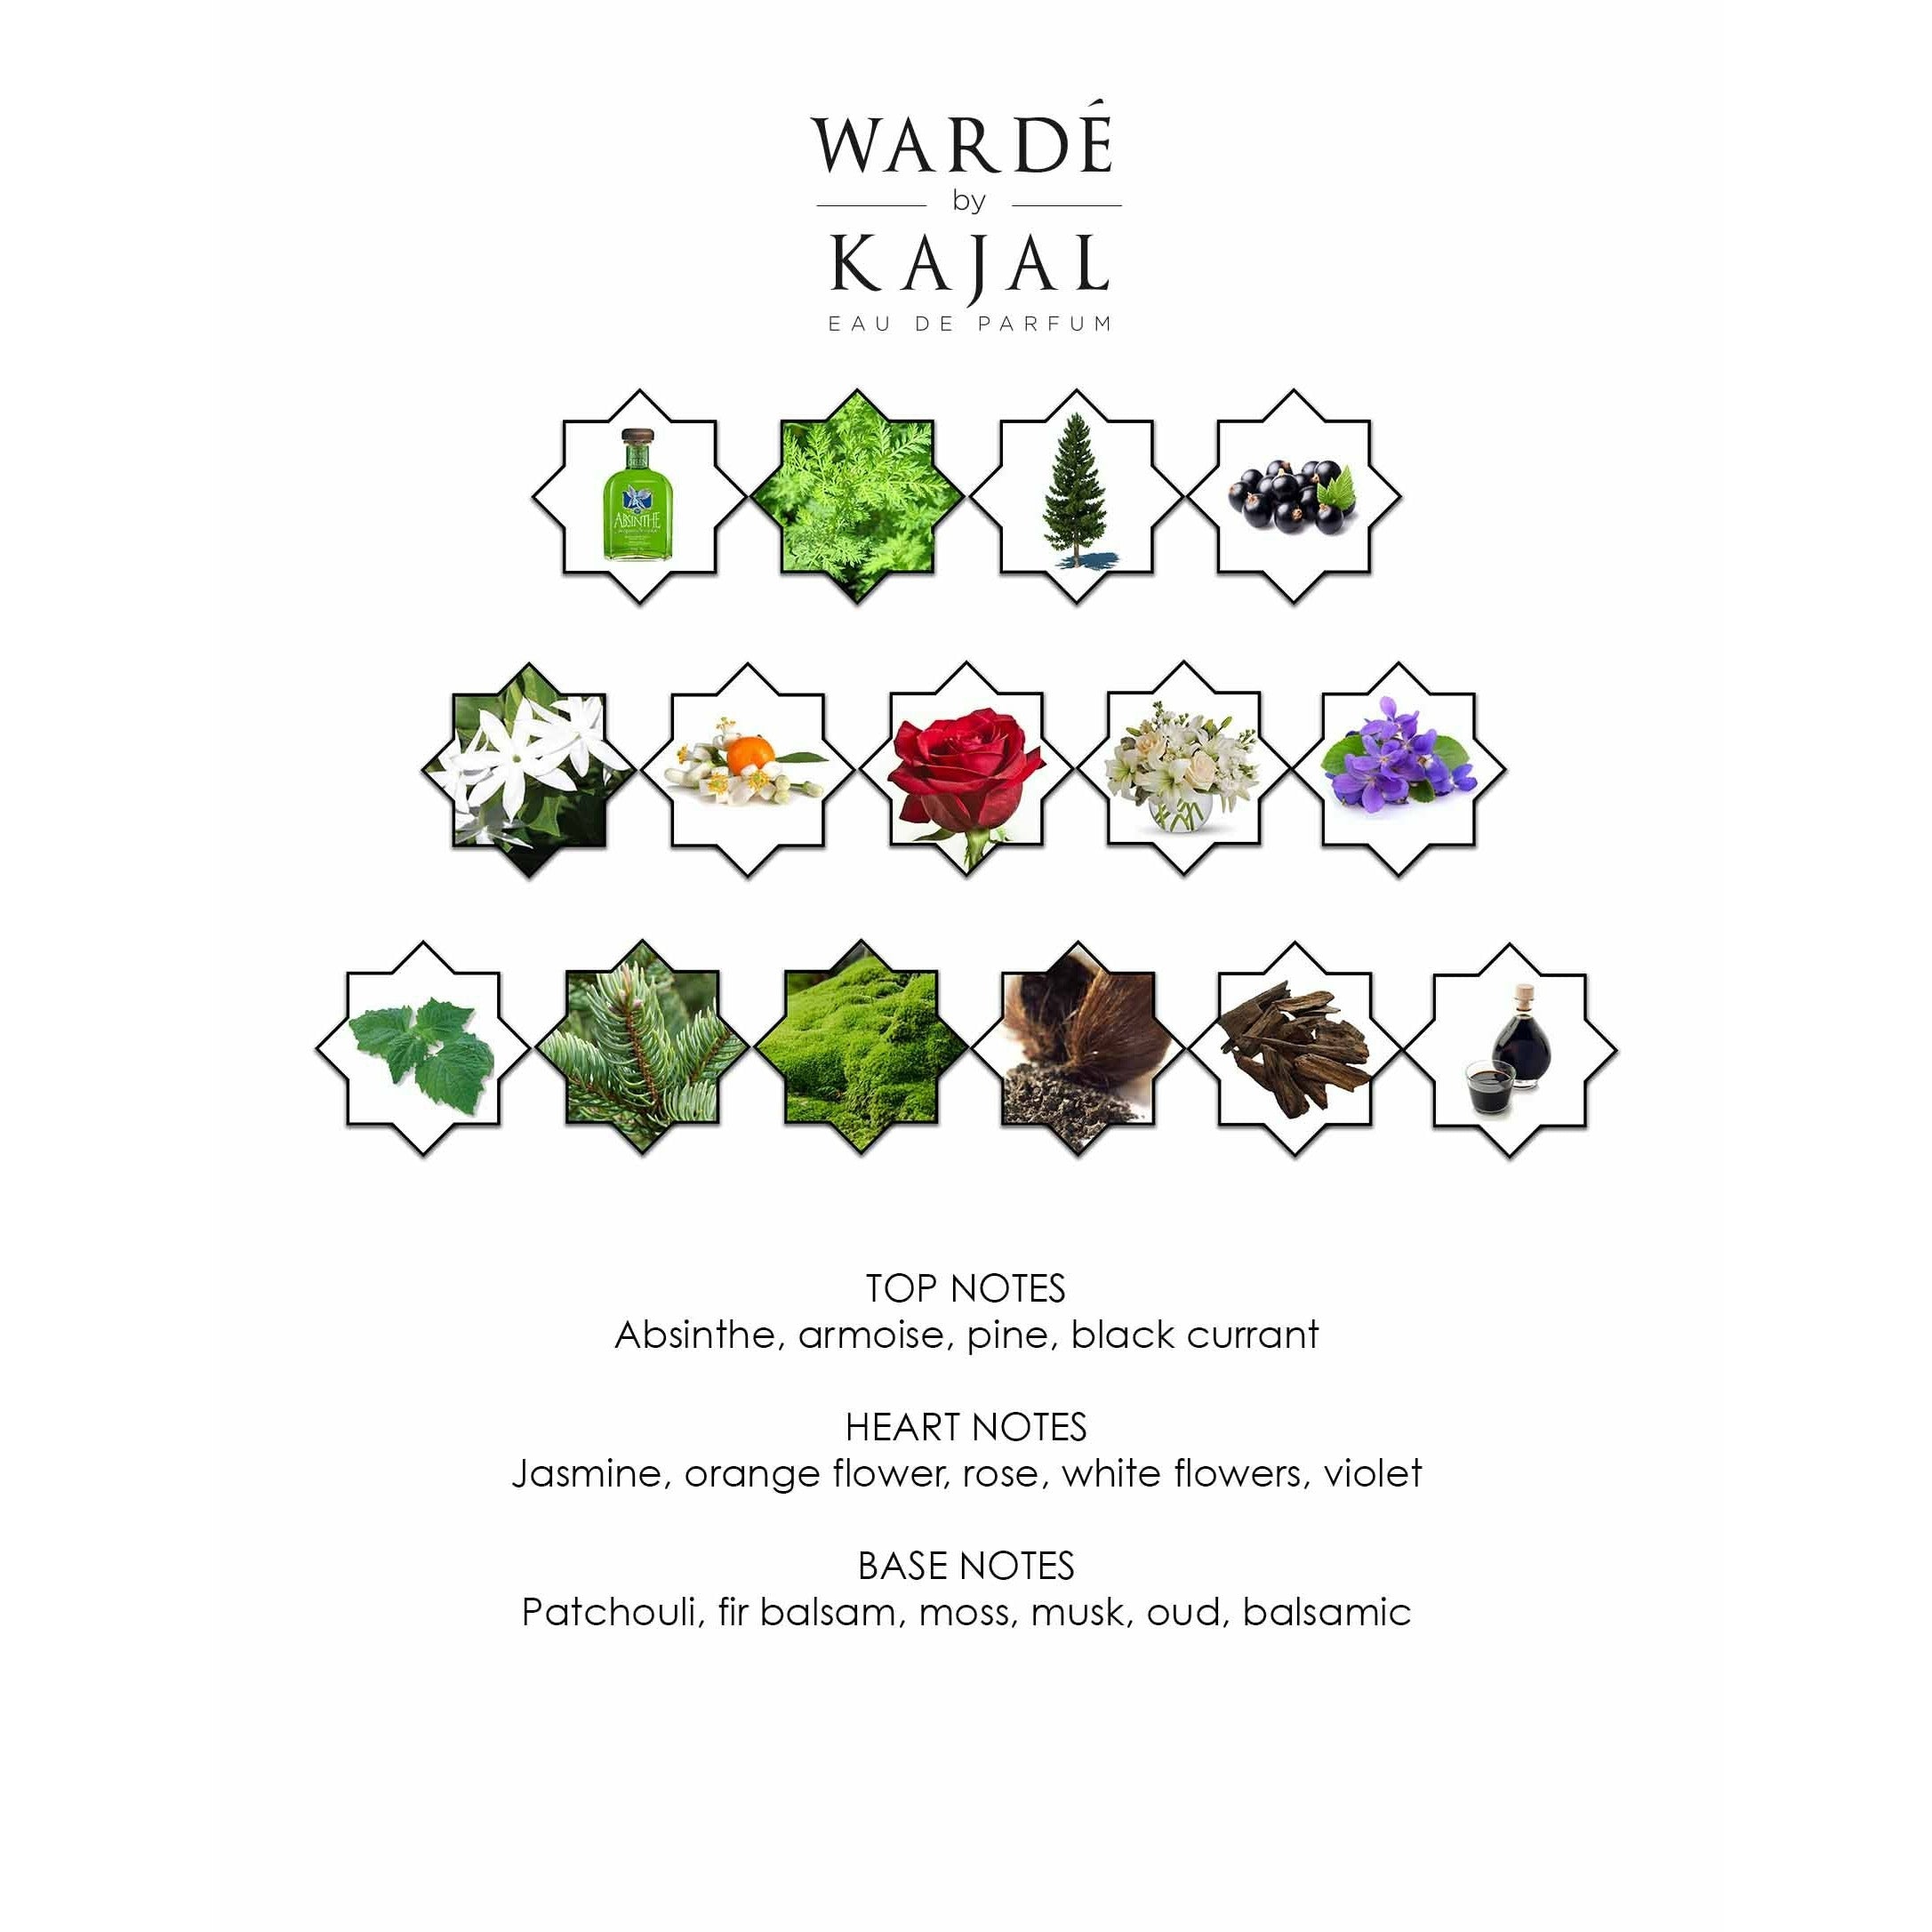 Notes of Warde by Kajal EDP 100ml.  A new niche fragrance part of the Warde Collection.